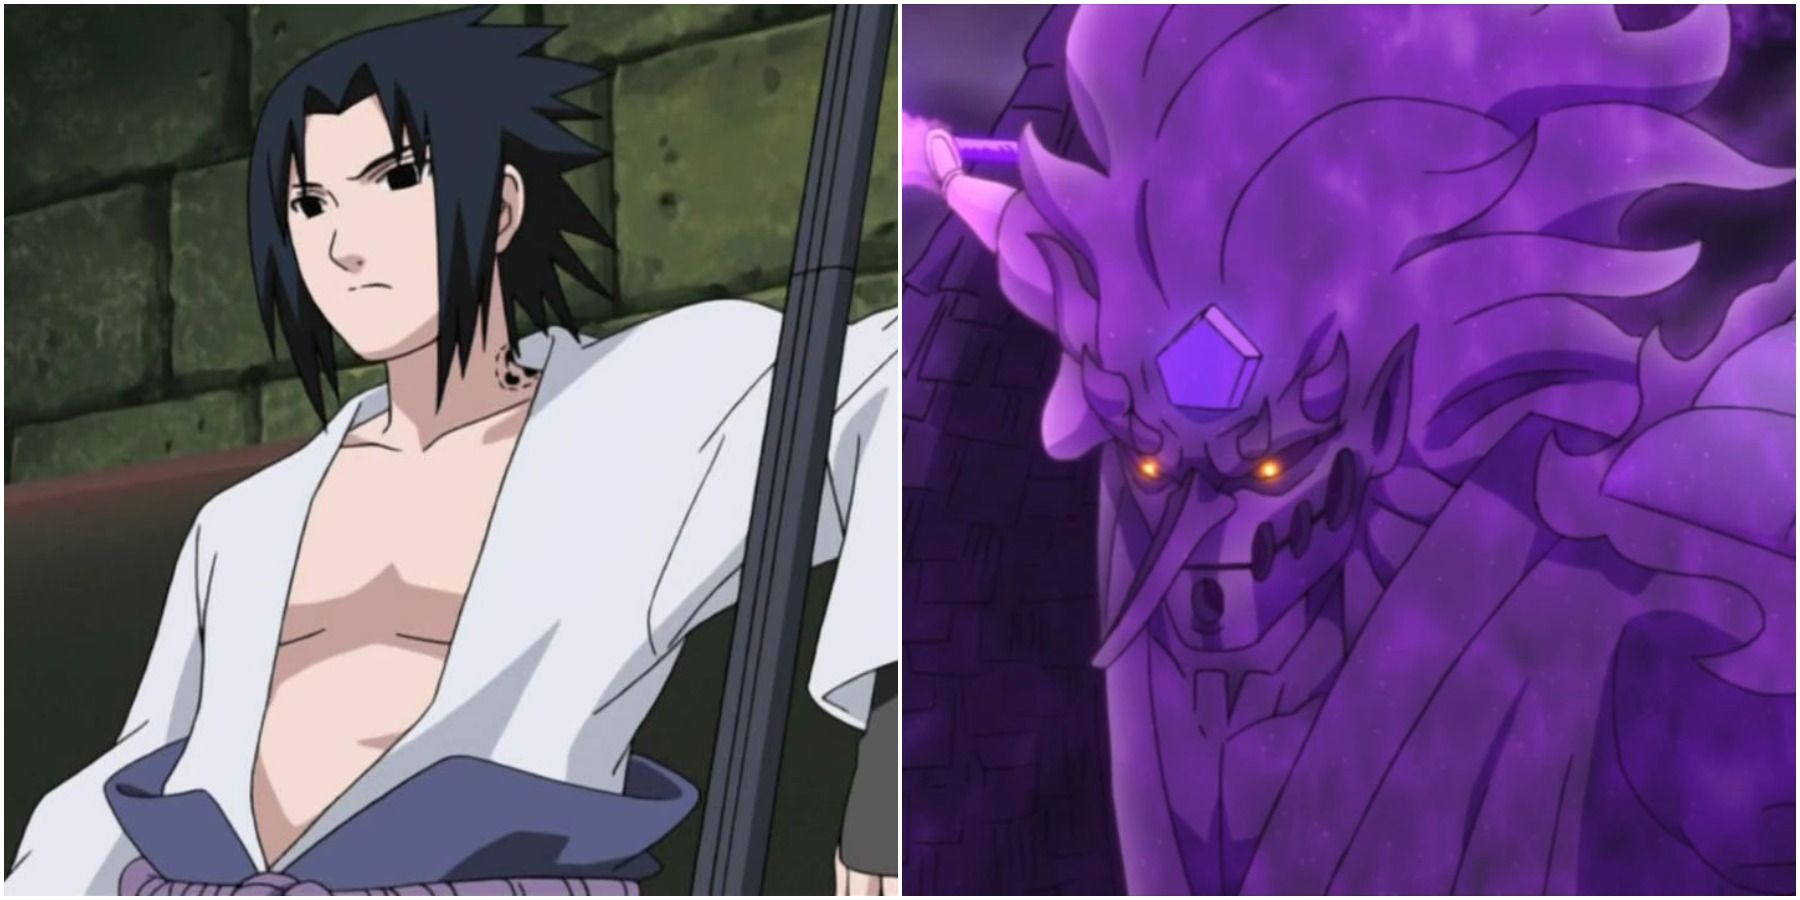 Sasuke In & Out Of His Perfect Susanoo